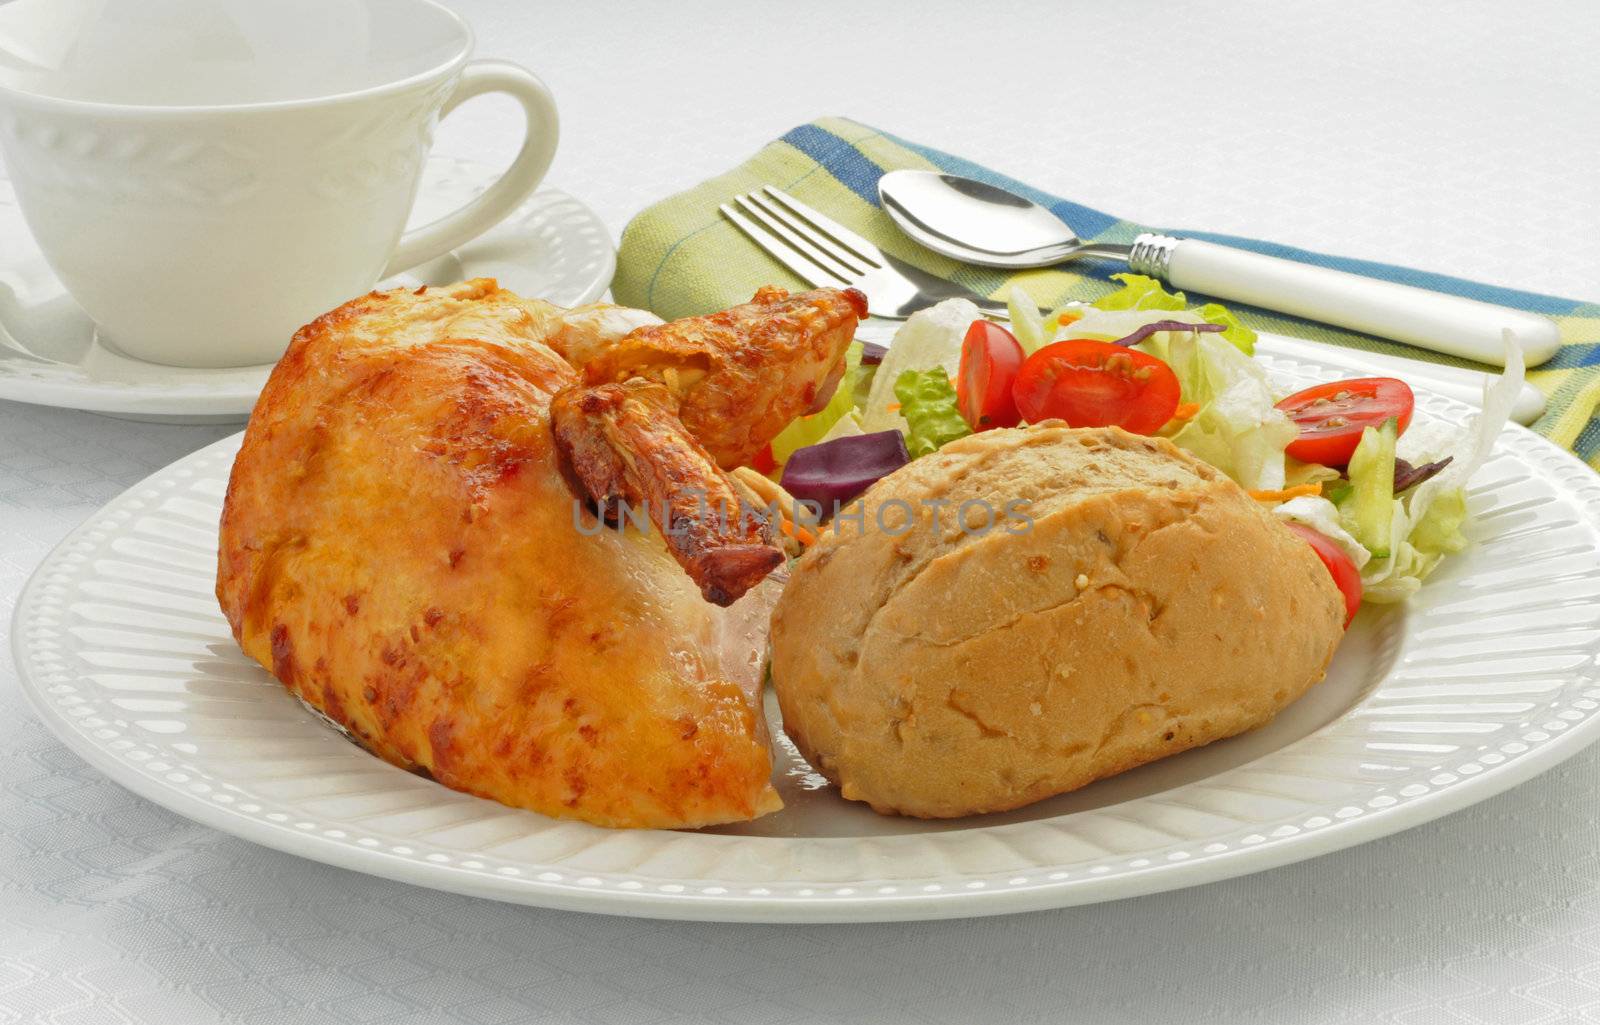 Delicious chicken served with fresh roll and salad.